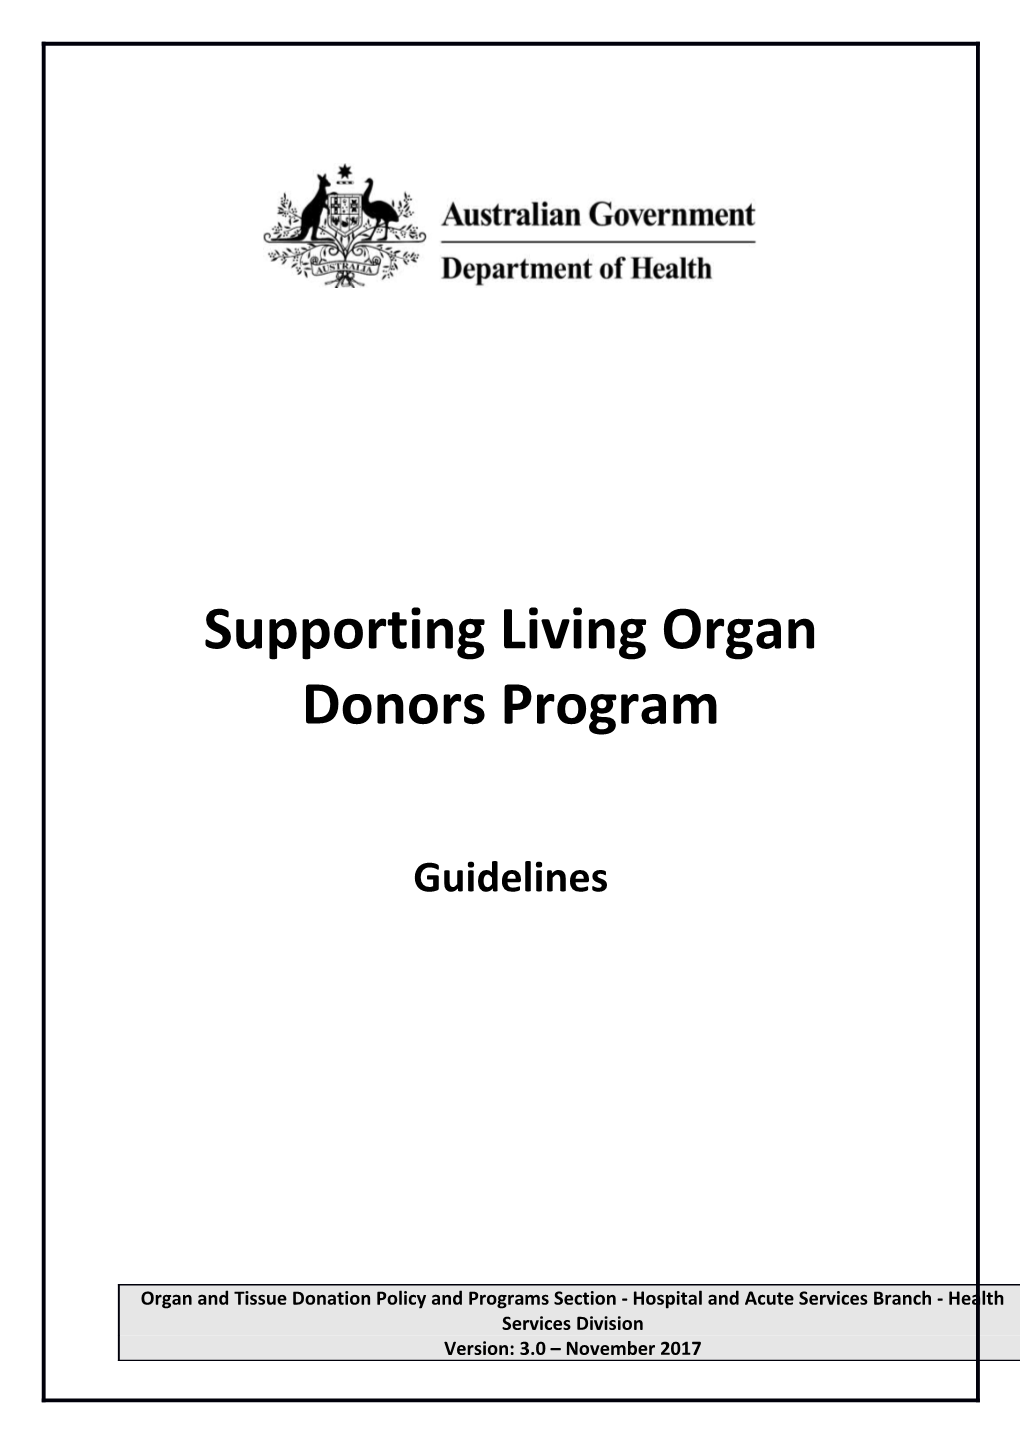 Supporting Living Organ Donors Program - Guidelines